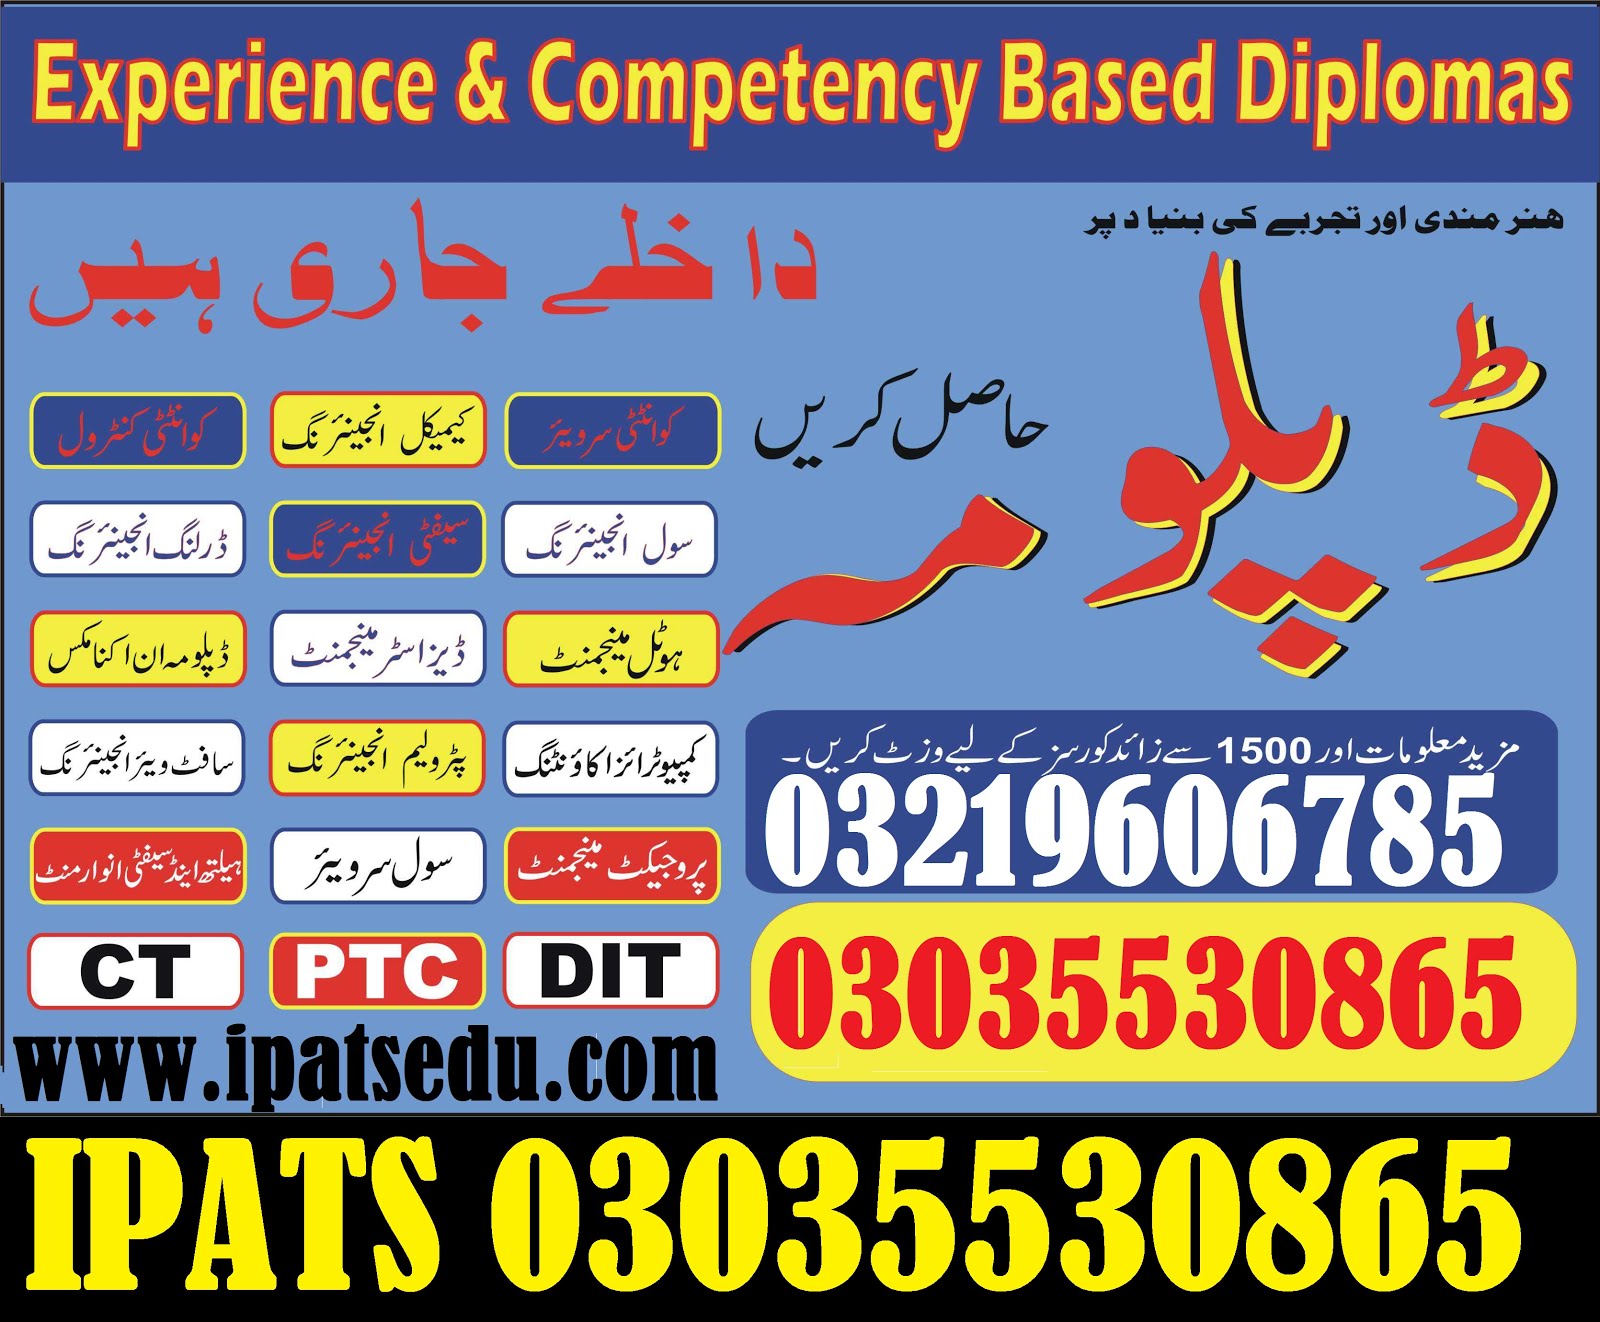 Technical Diploma 3035530865 Get Govt diploma at home